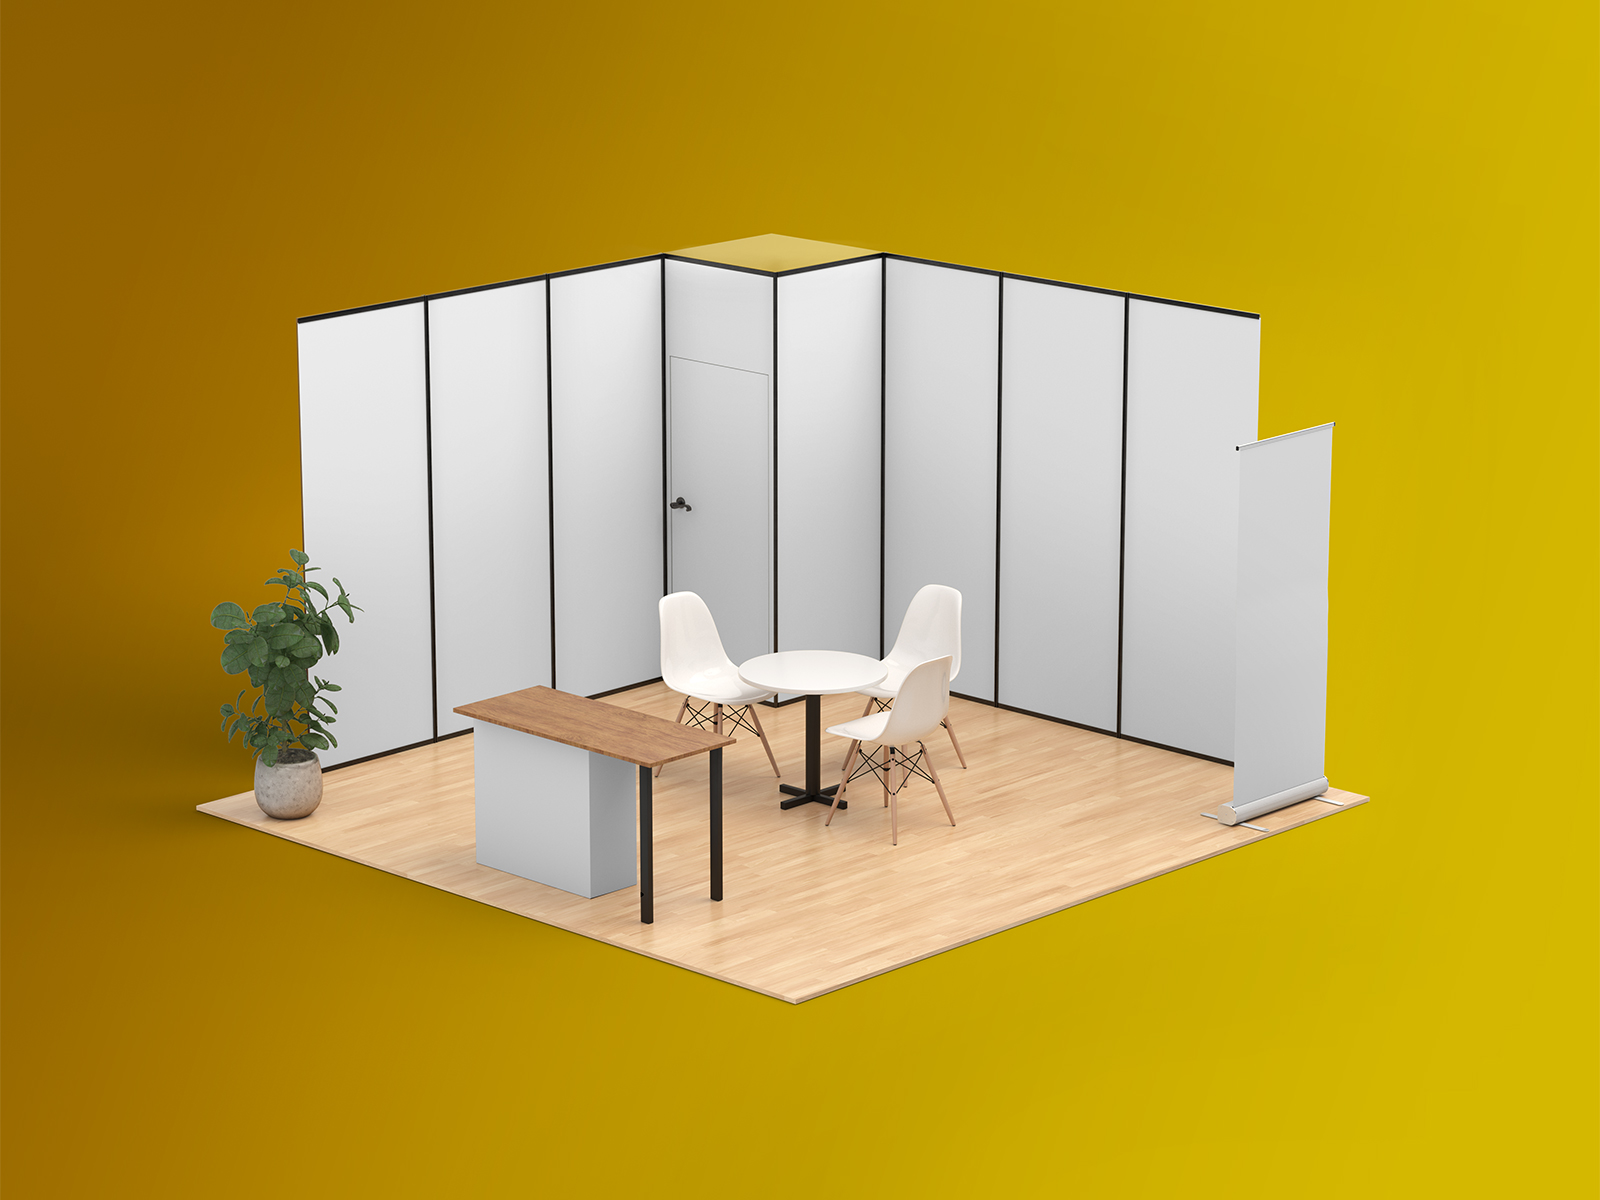 Free Exhibition Booth Mockup (PSD)